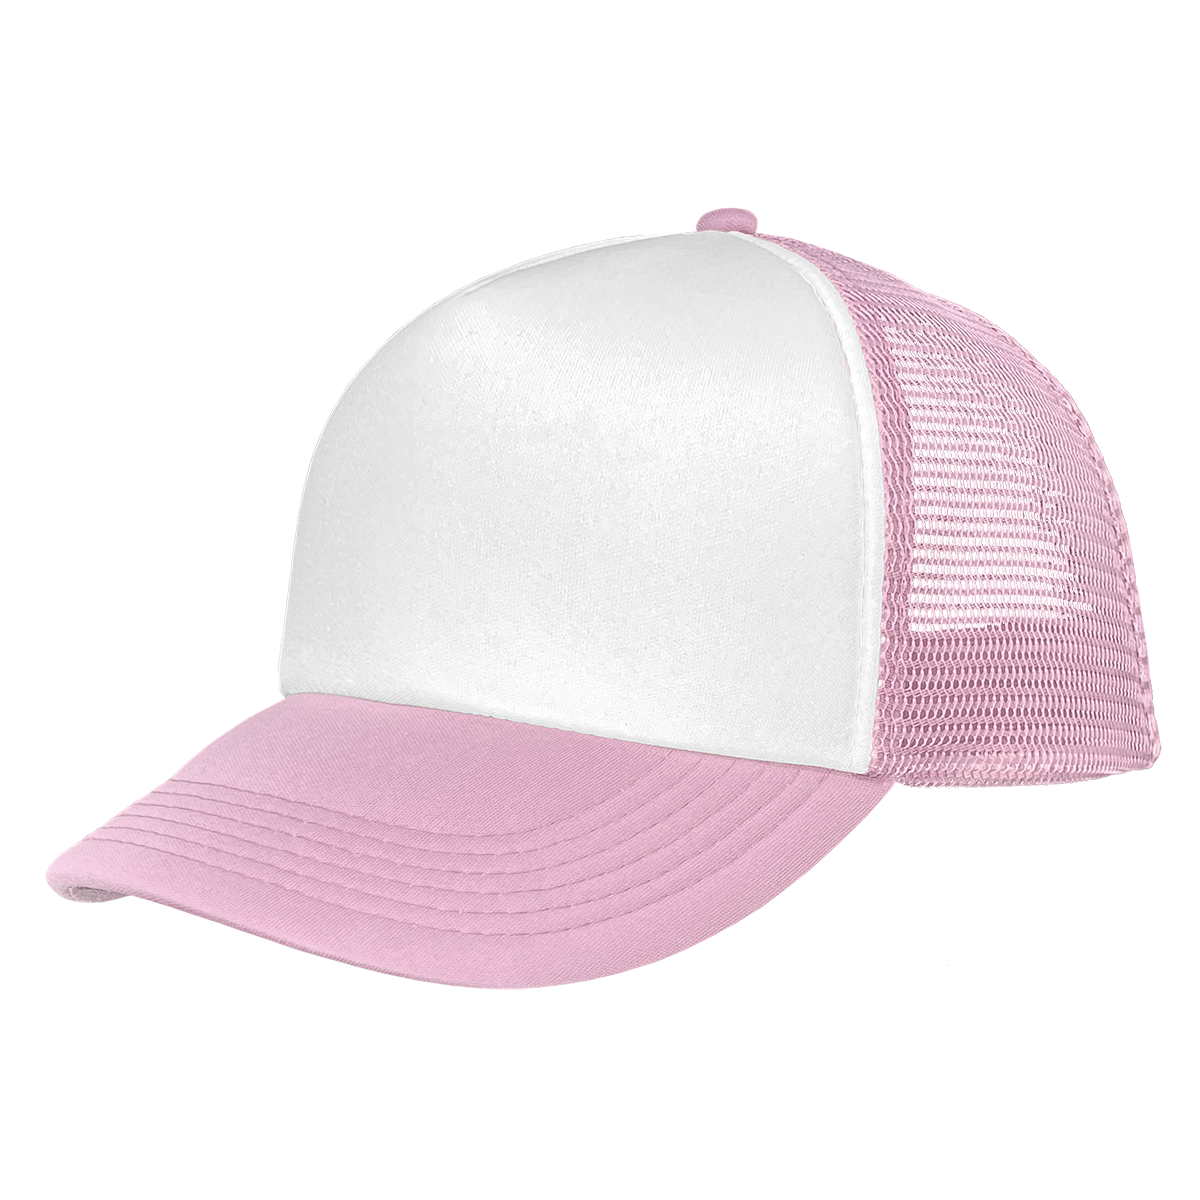 CASQUETTE TRUCKER Classic white-baby-pink